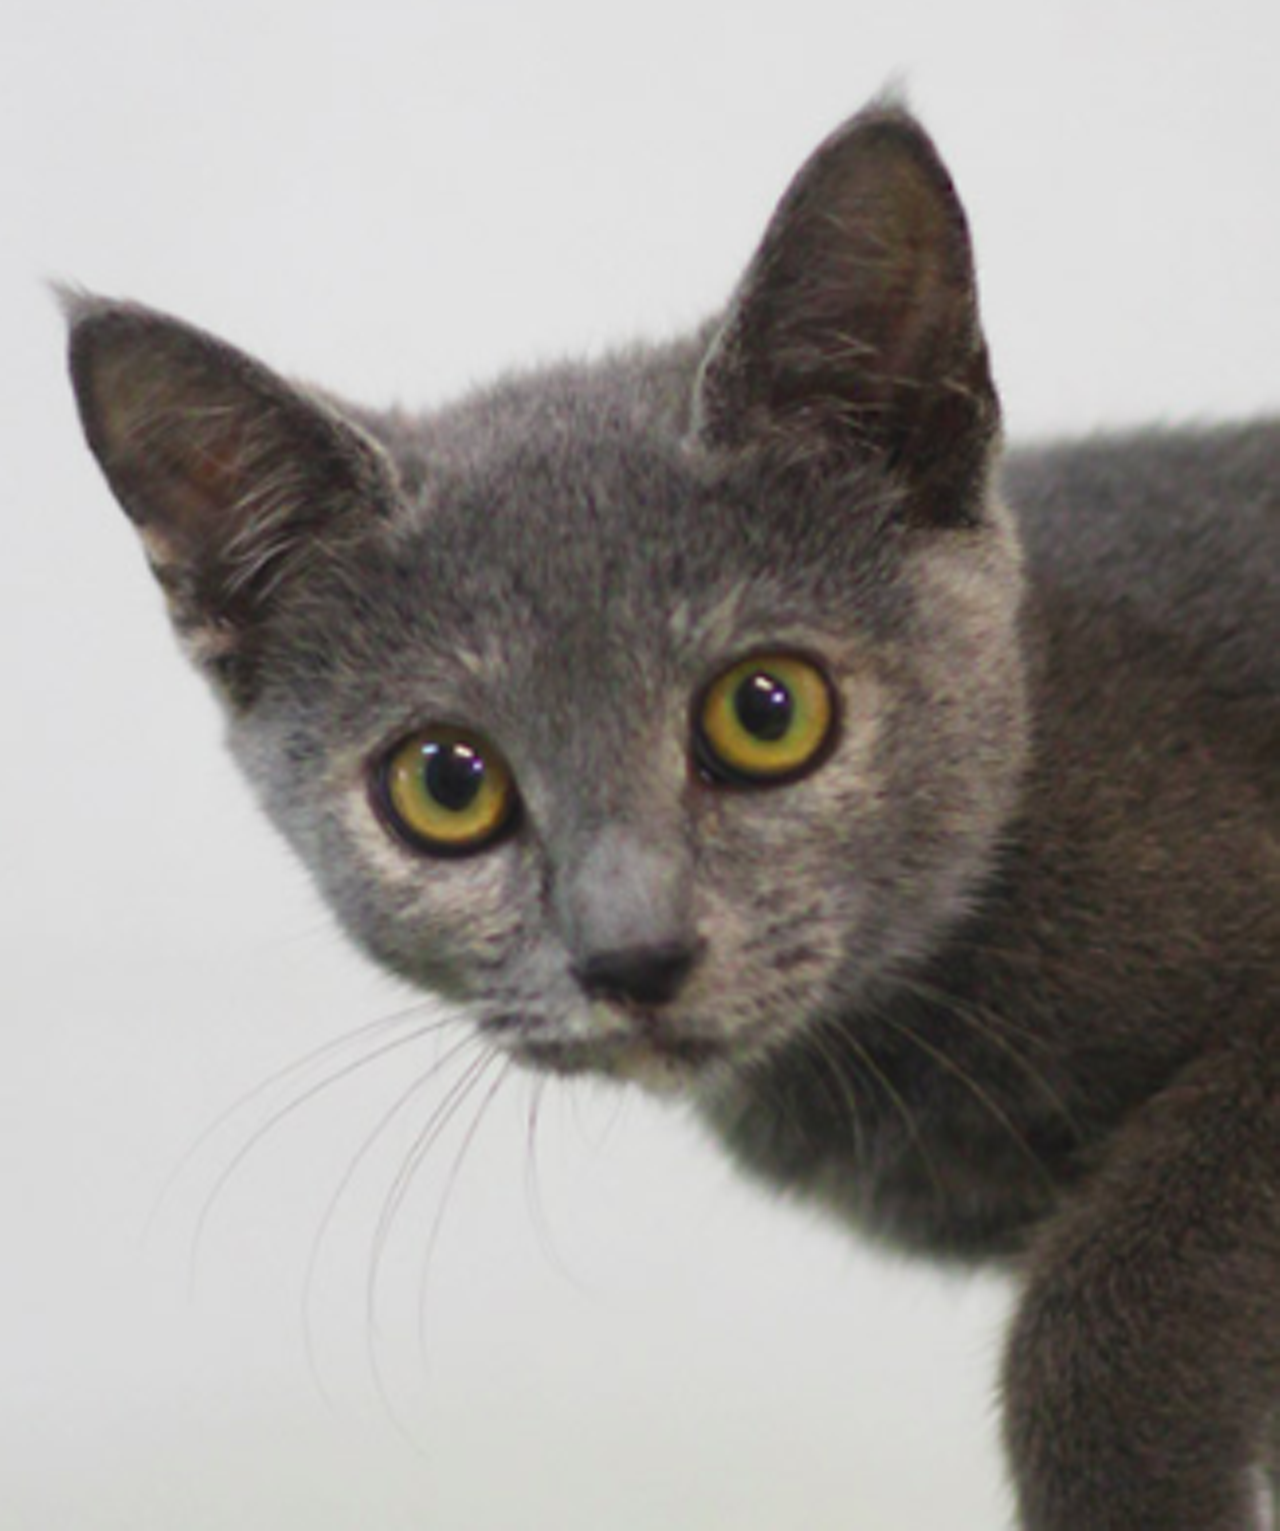 Madrid
"Hi, I’m Madrid! I am a nice and friendly kitty who’s still young and full of energy. I was one of the pets that ADL picked up from SPCA of Brazoria County in Lake Jackson, TX. I was already in the shelter looking for someone to adopt me and then hurricane Harvey came around. After that horrible Harvey left, I was transferred to ADL so that room could be made for pets at SPCA who were displaced by Harvey. Now I am looking for a home here at ADL, I hope I can find my person soon!"